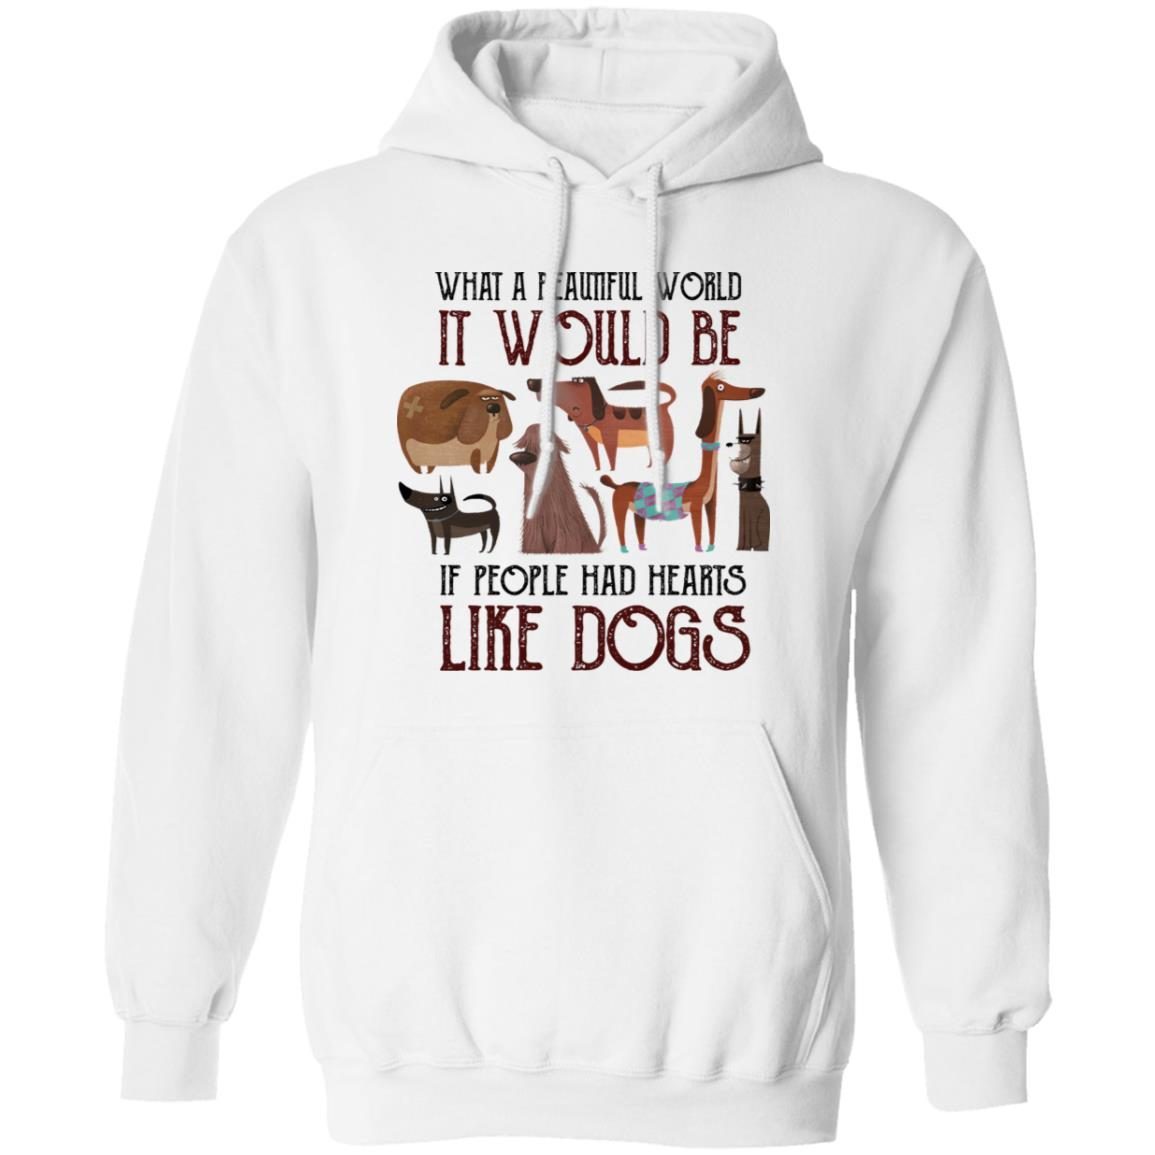 What A Beautiful World It Would Be If People Had Hearts Like Dogs shirt 3